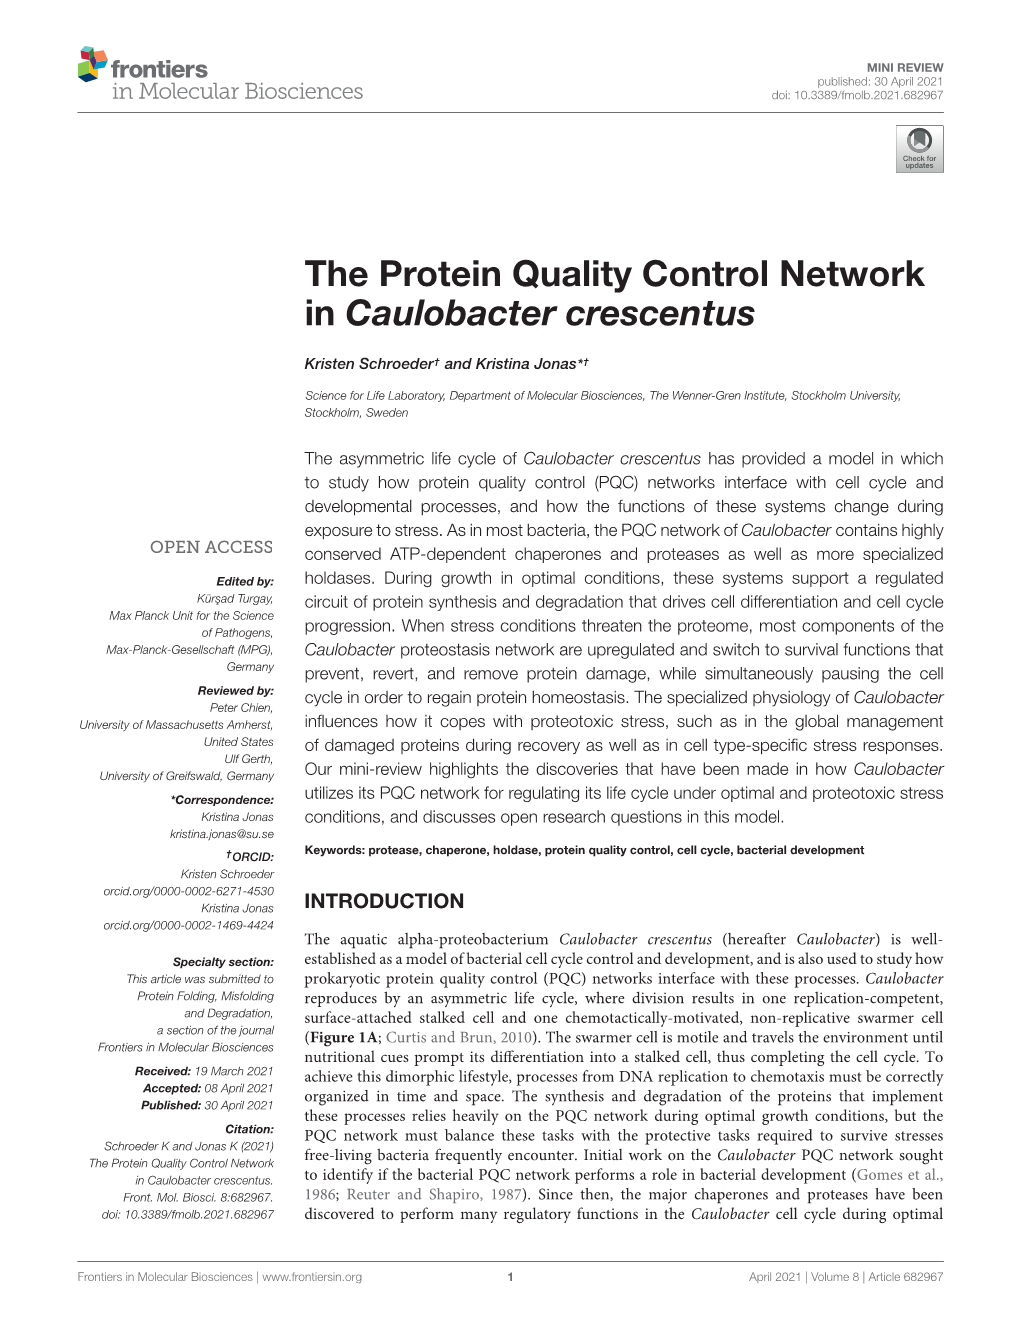 The Protein Quality Control Network in Caulobacter Crescentus